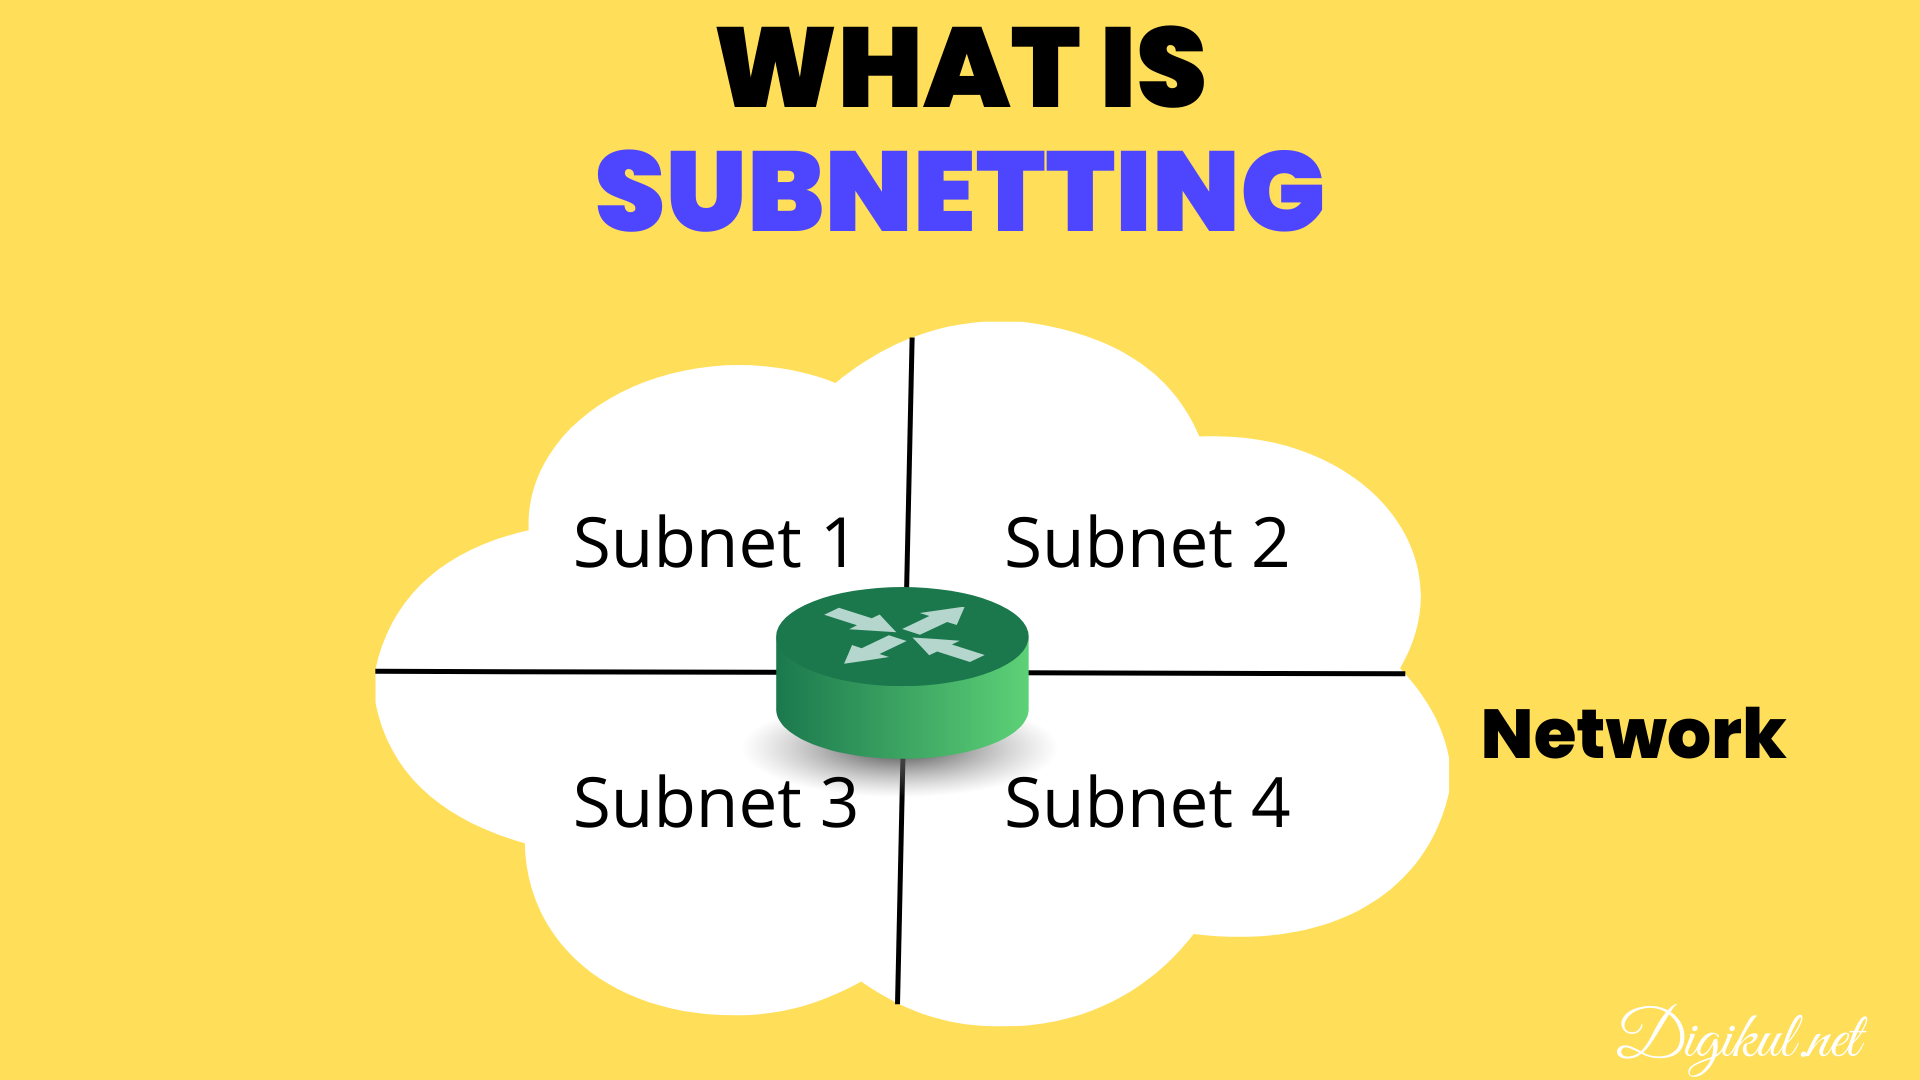 20 Subnetting Questions and Answers from subnettingquestions.com